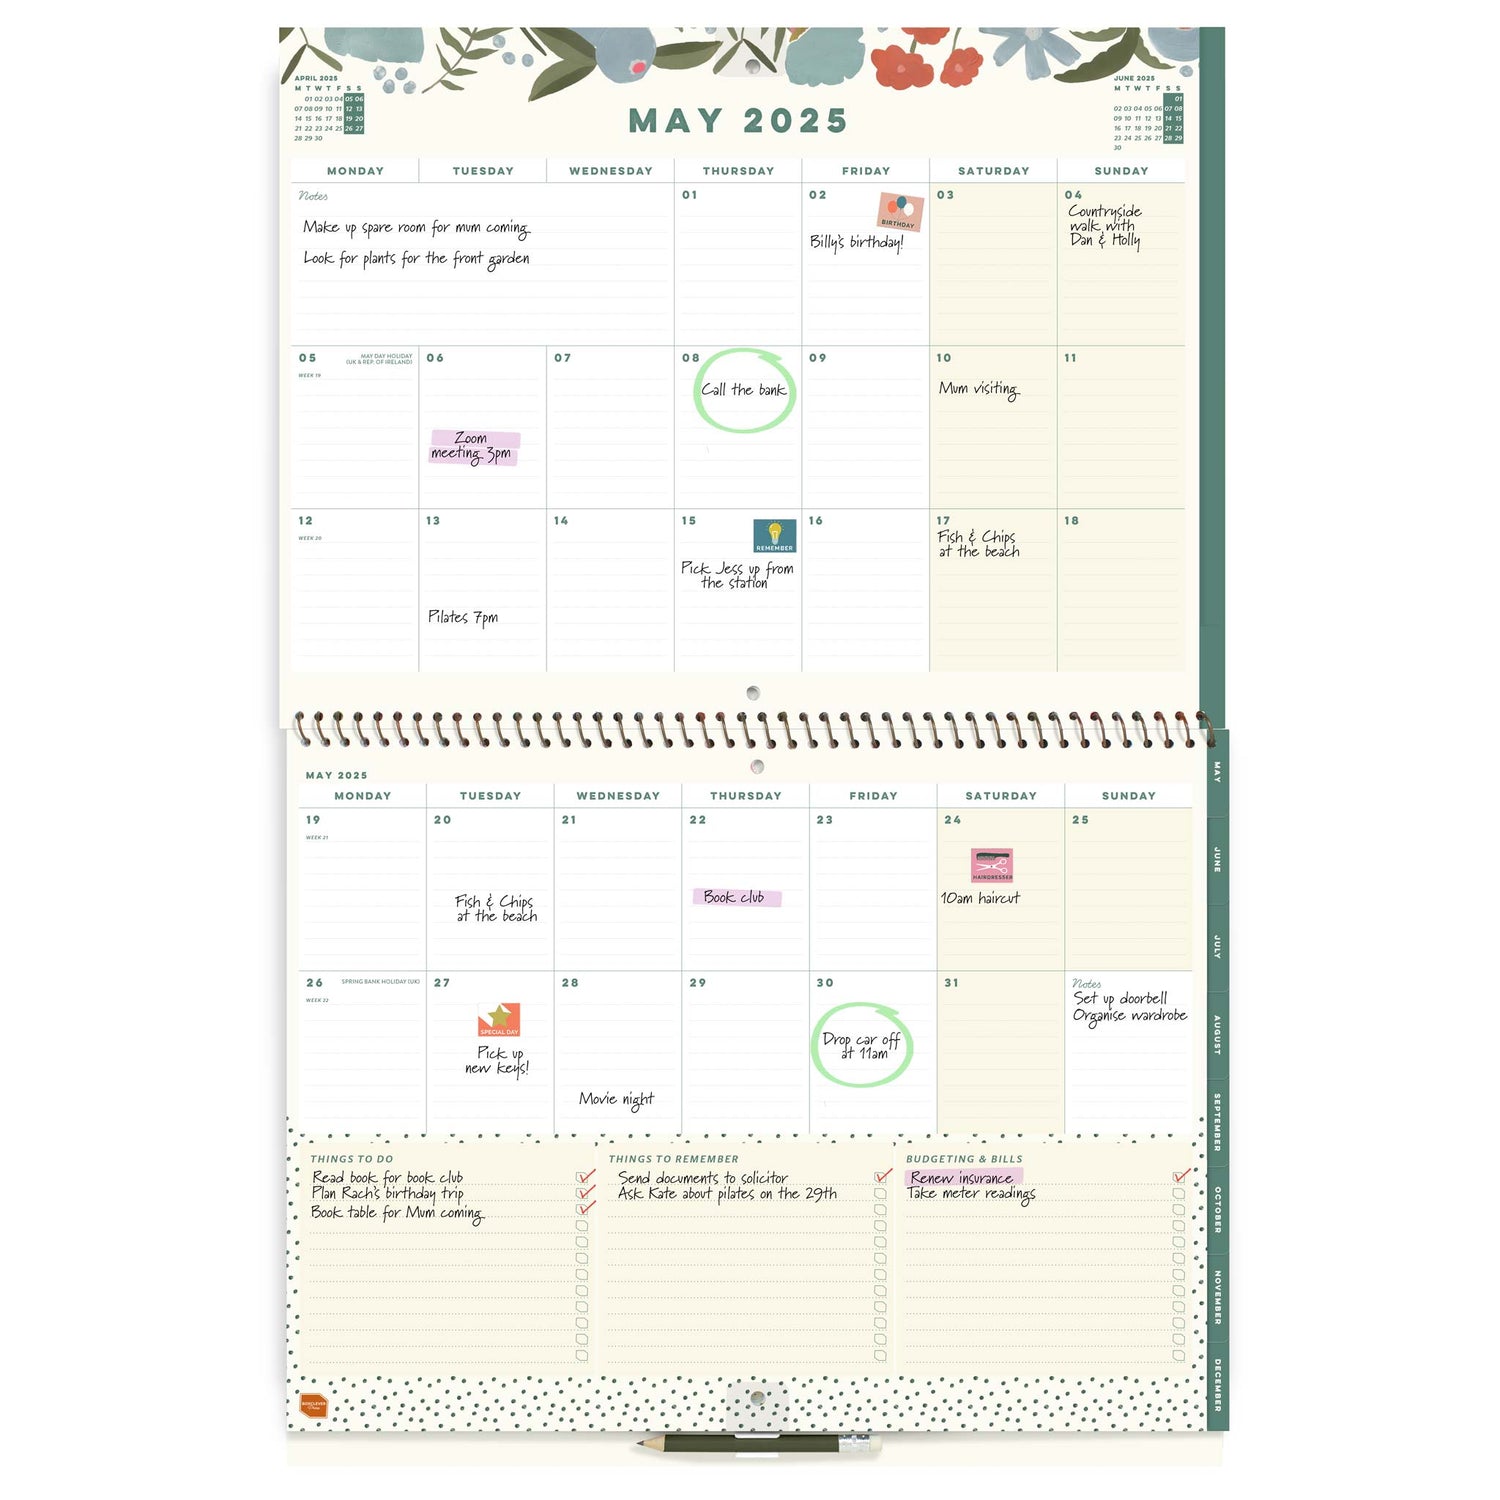 Open page spread of a large wall calendar, showing May 2025 with writing and stickers on it